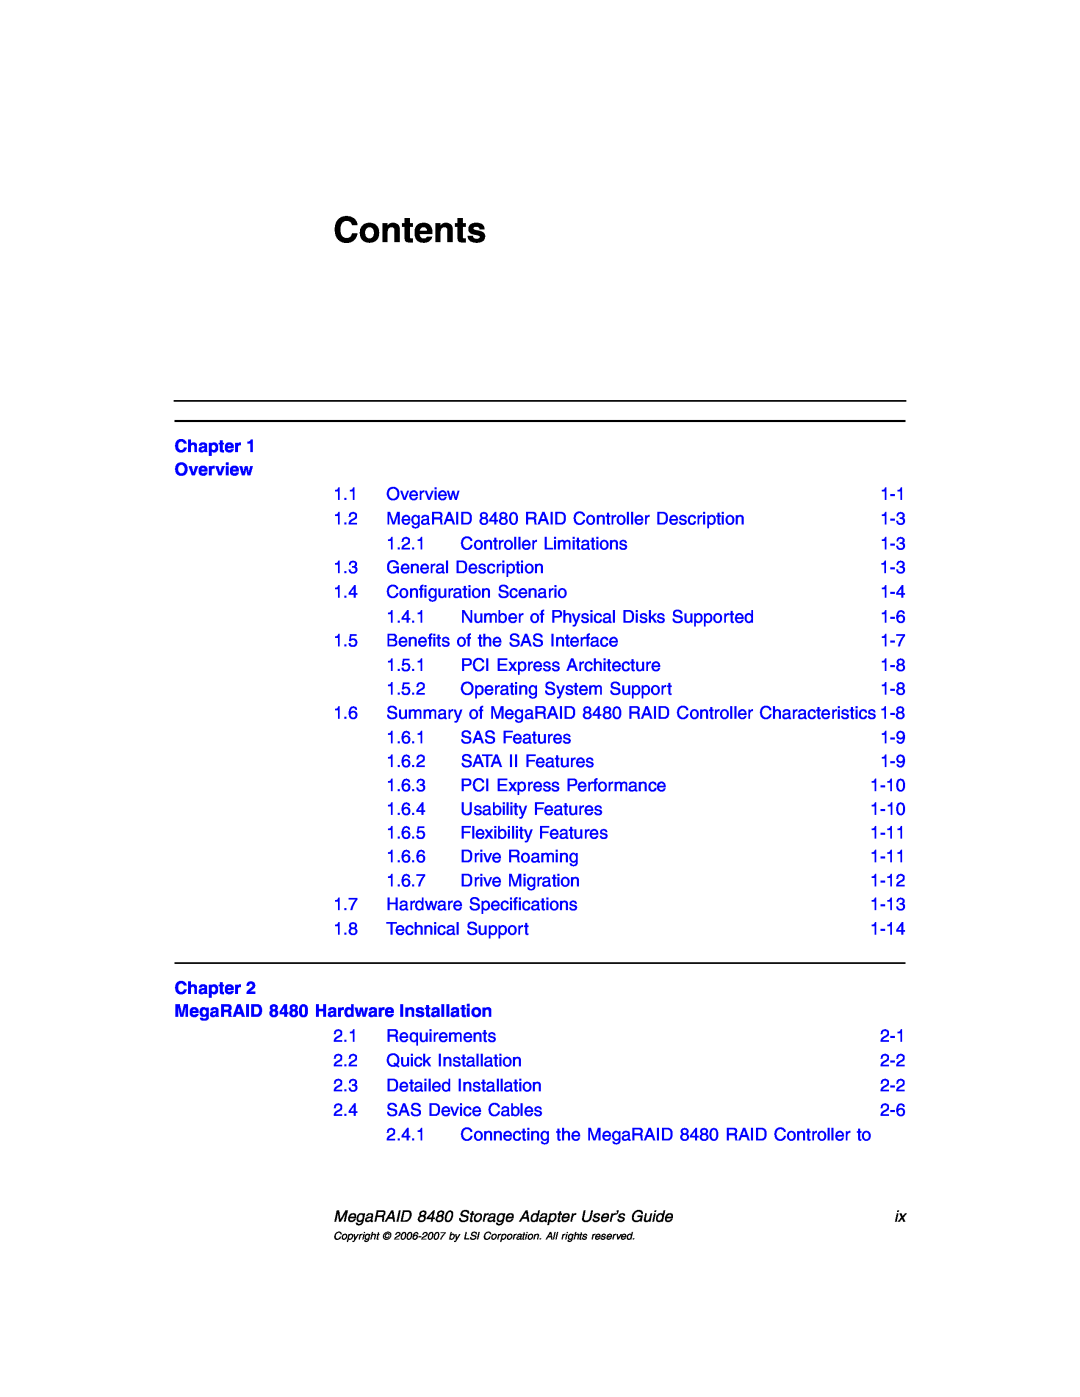 IBM manual Contents, Chapter Overview, MegaRAID 8480 Hardware Installation 